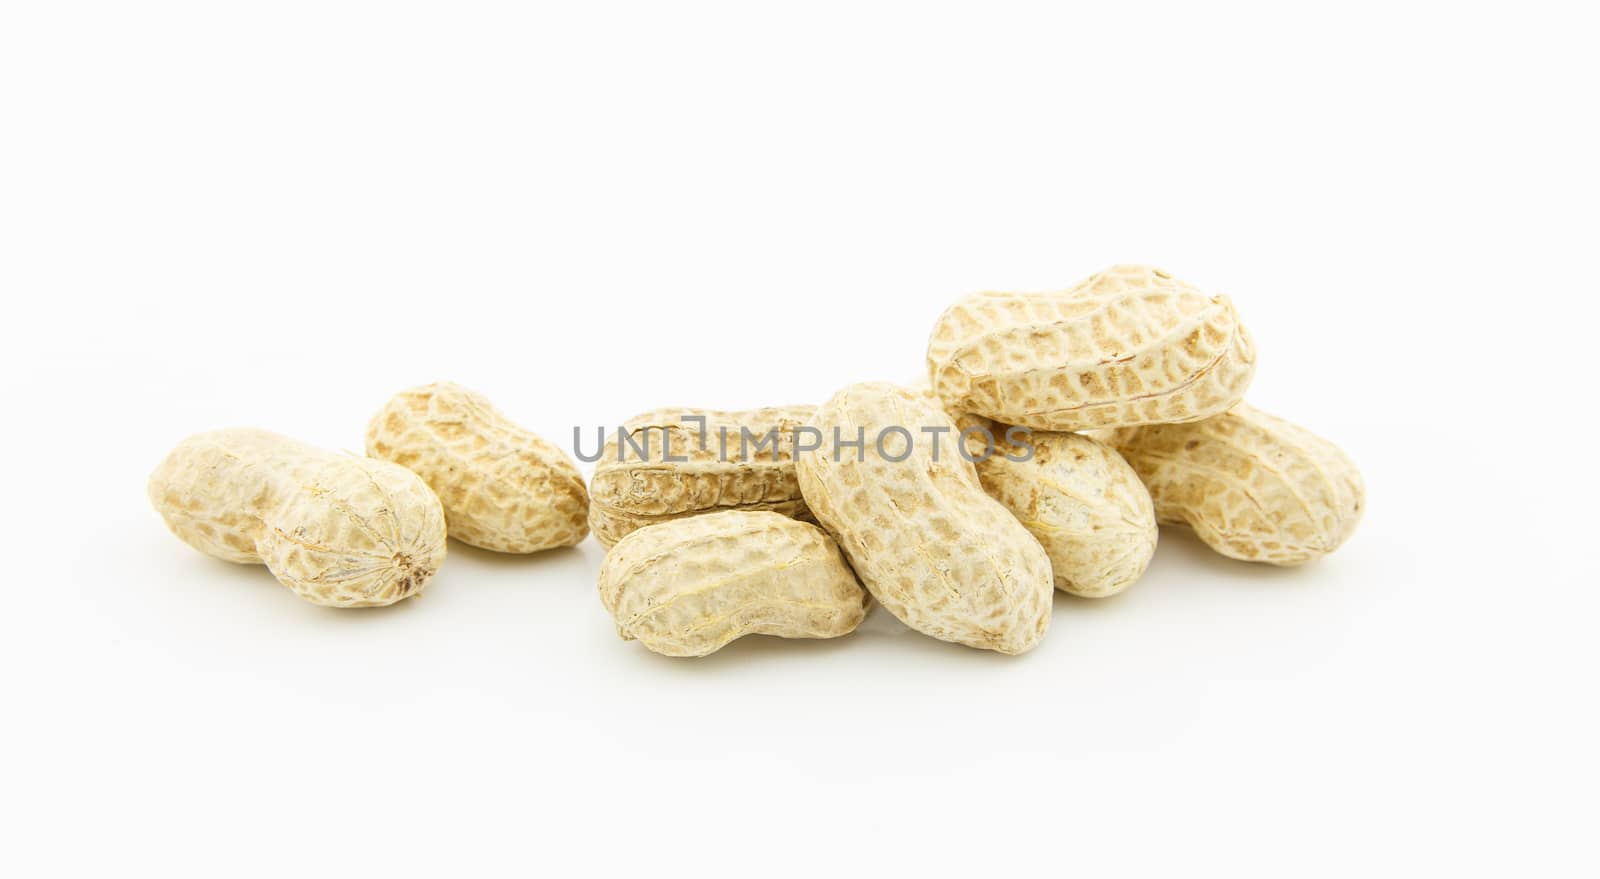 Dried peanuts on a white background